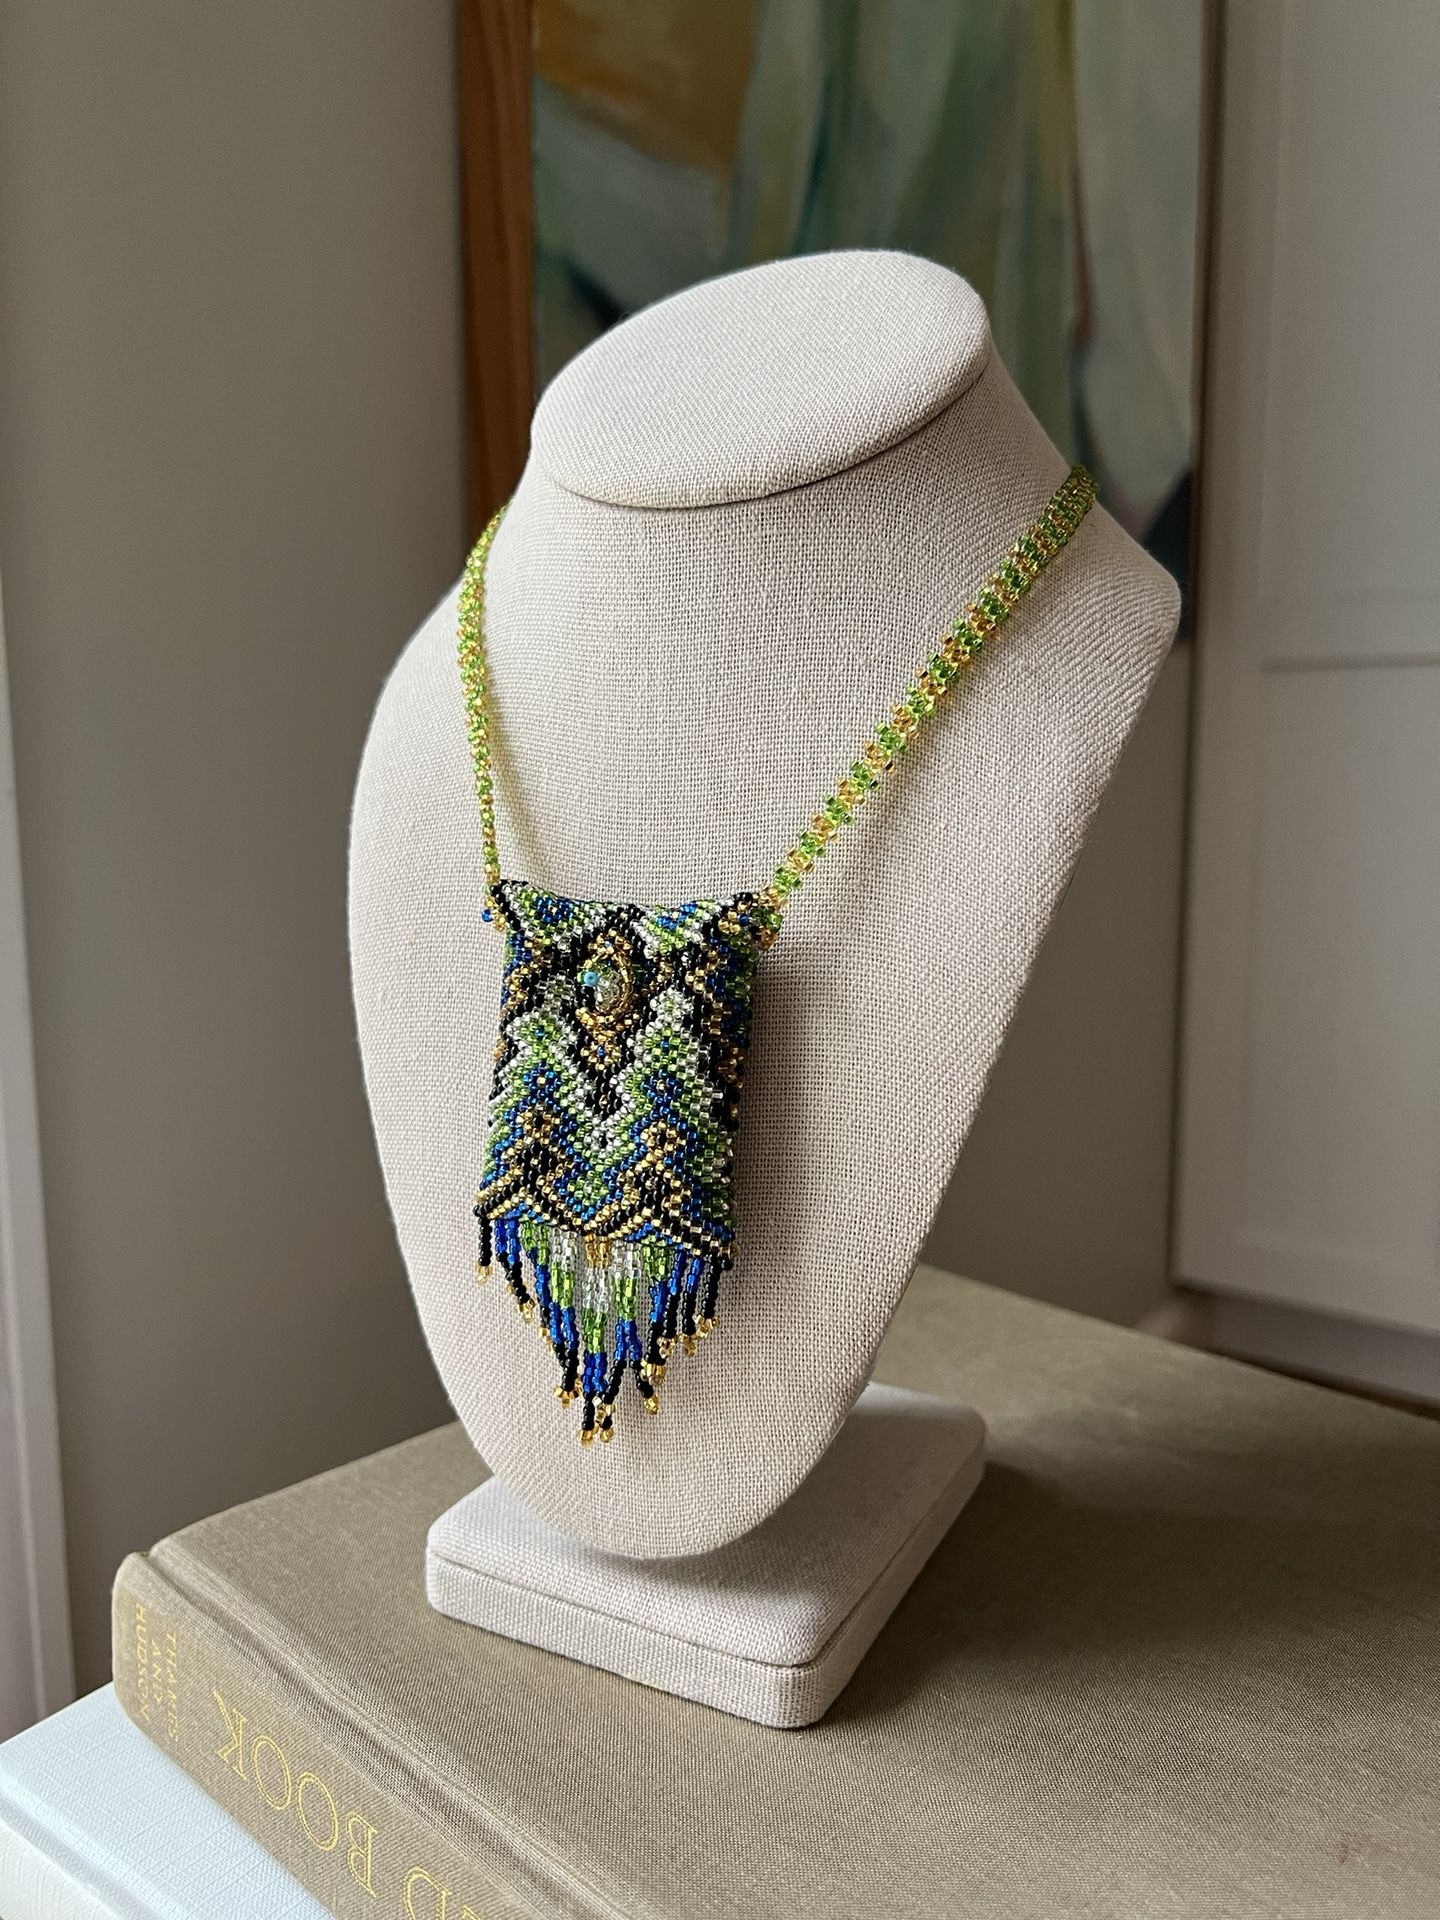 Ornate Beaded Bag Necklace ( firm on price )